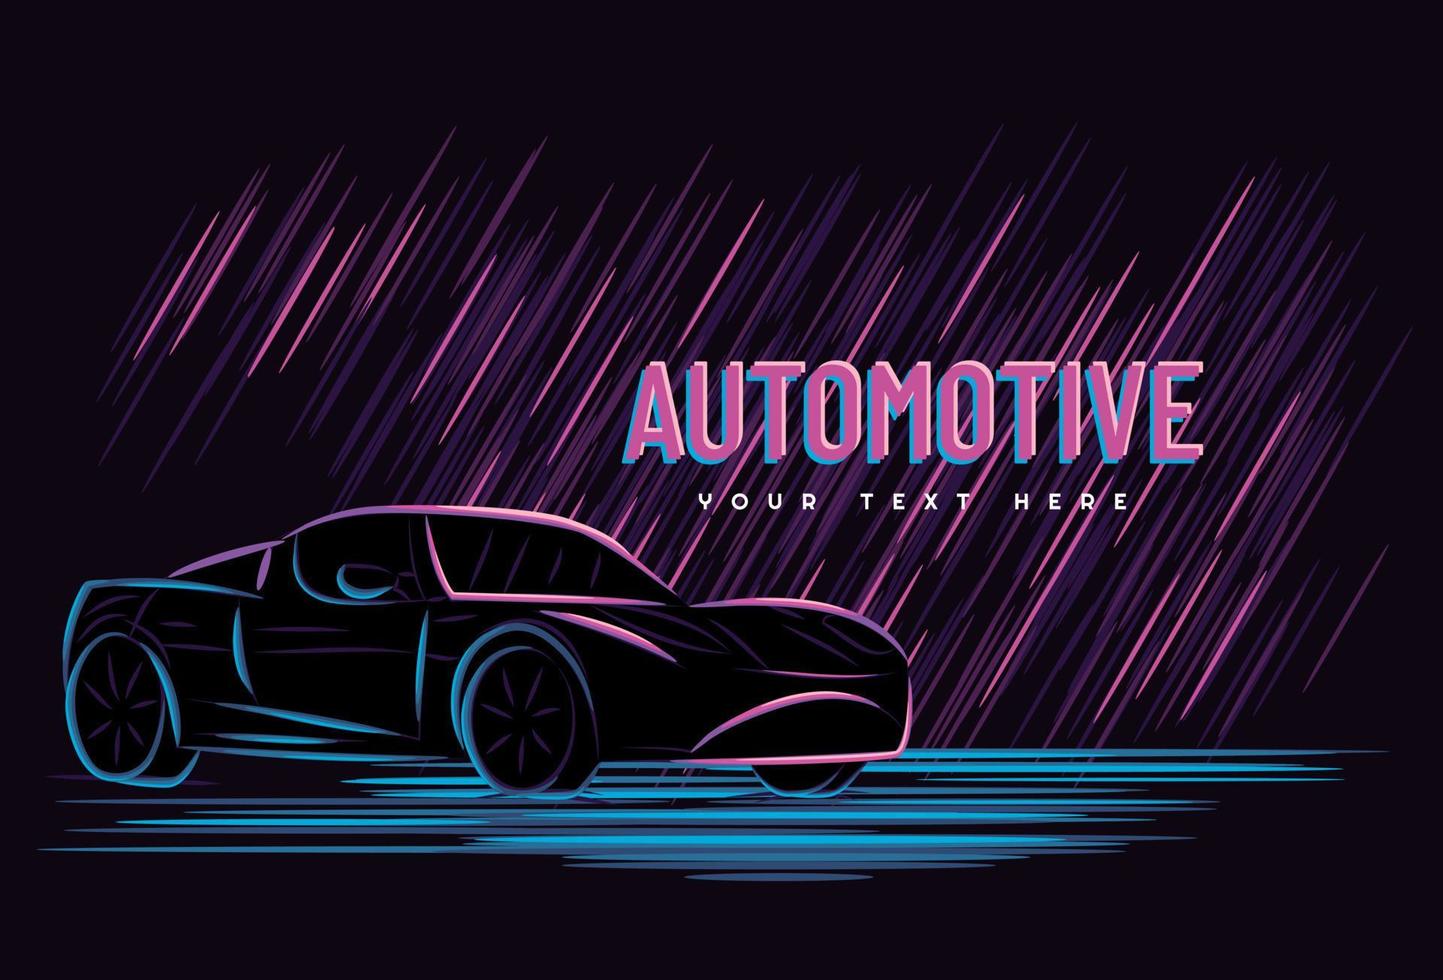 Illustration vector graphic of car automotive concept with line art neon sign style, Good for t shirt, banner, poster, landing page, flyer.